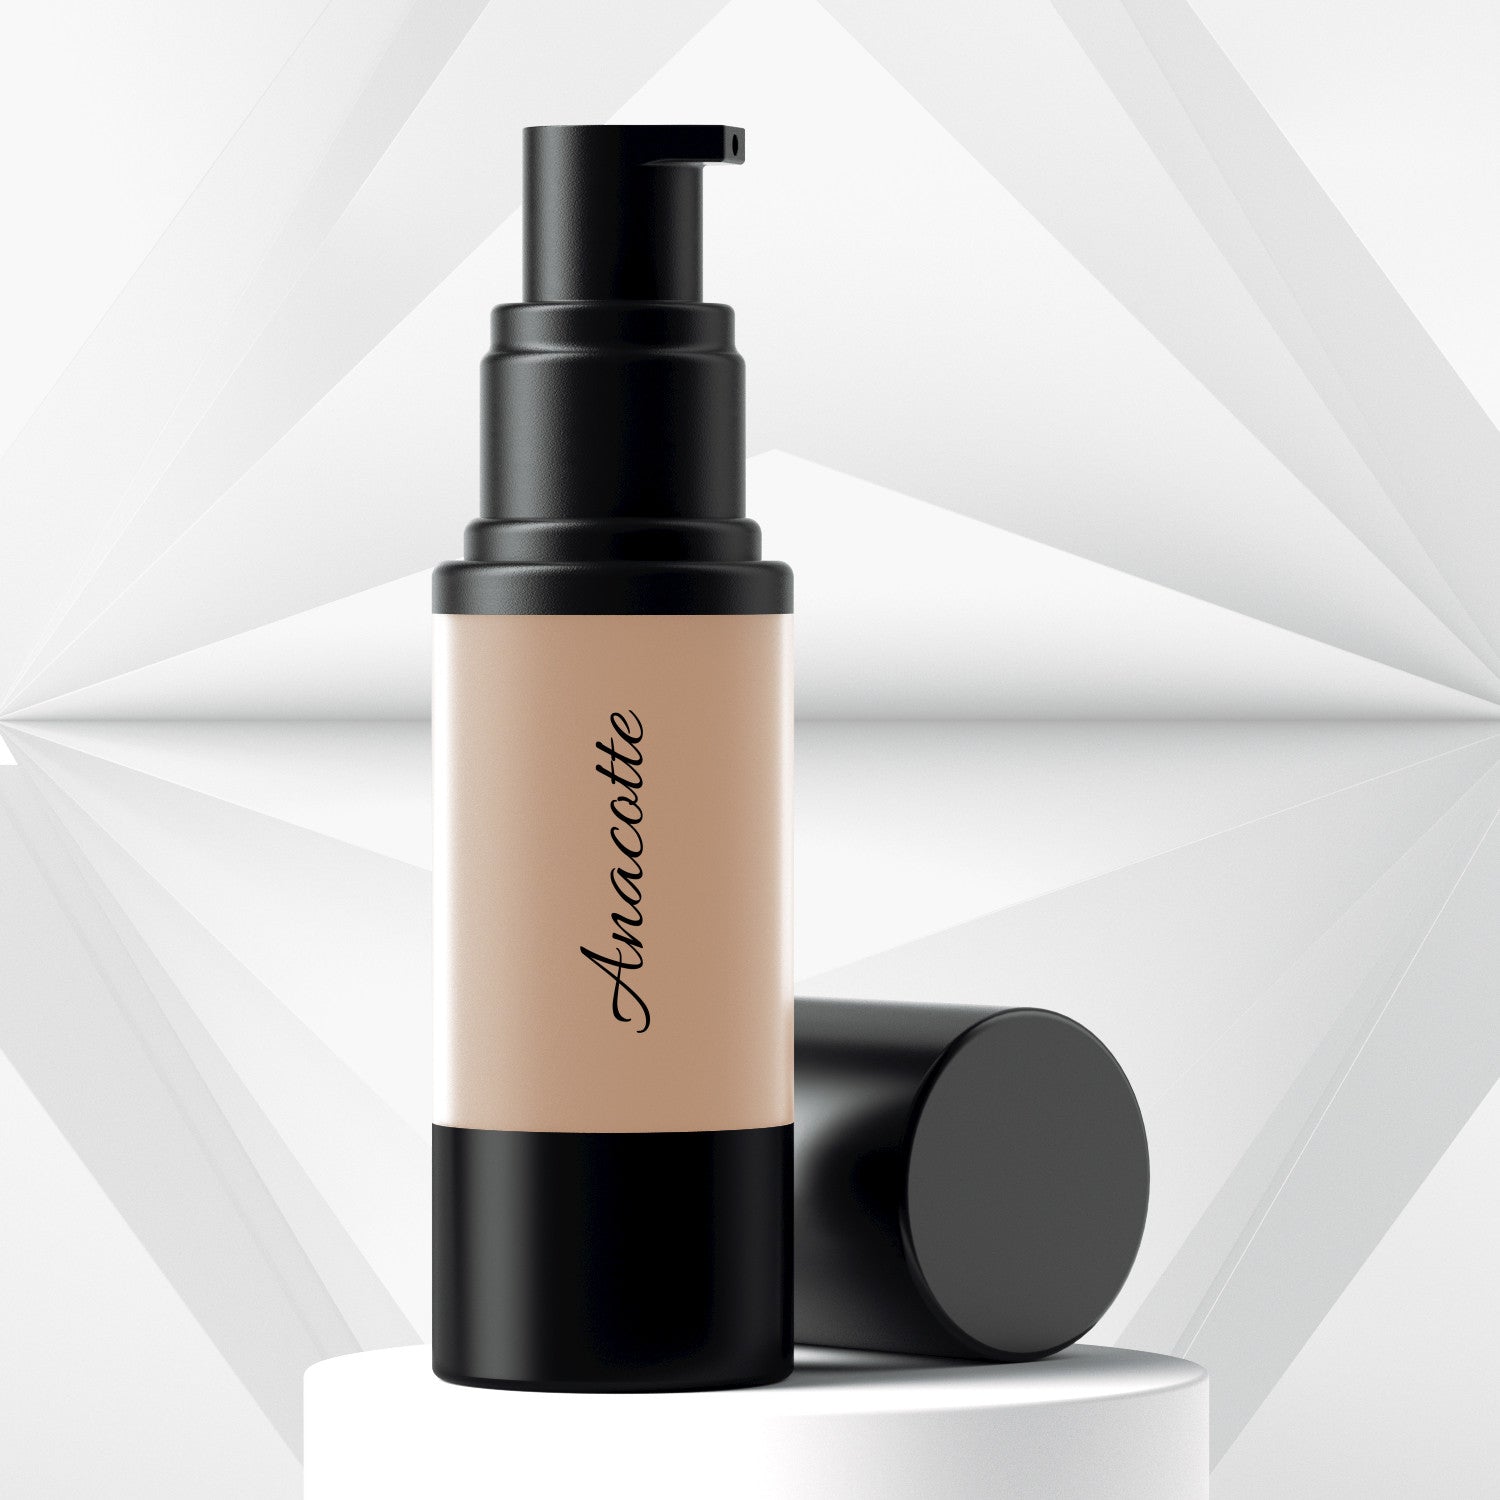 Anacotte Anti-aging Oil-Free Foundation Makeup background